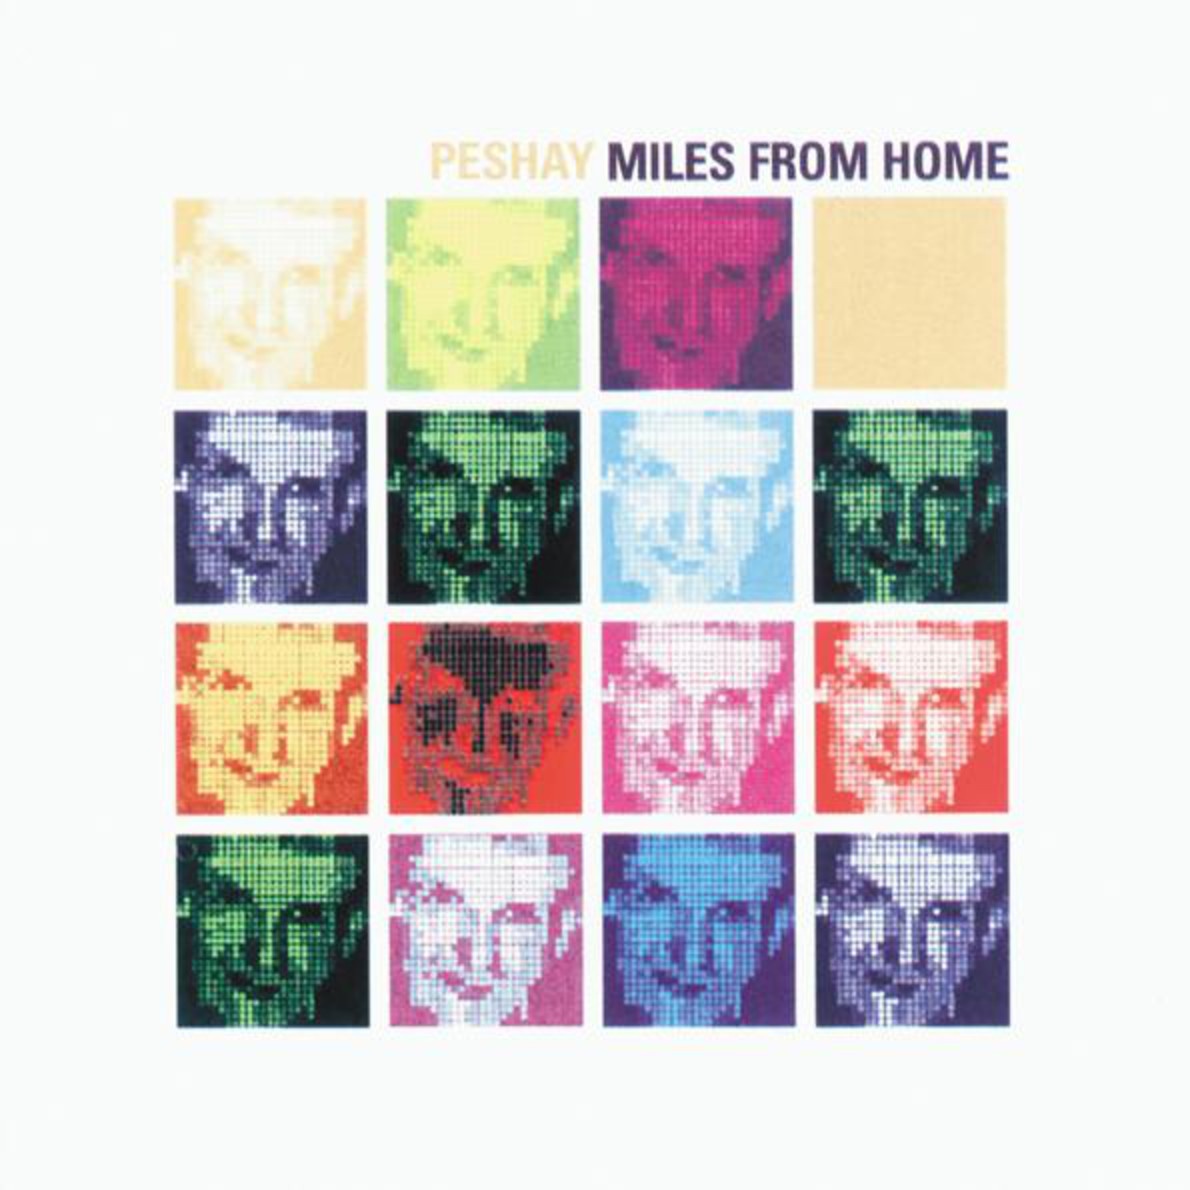 Miles From Home